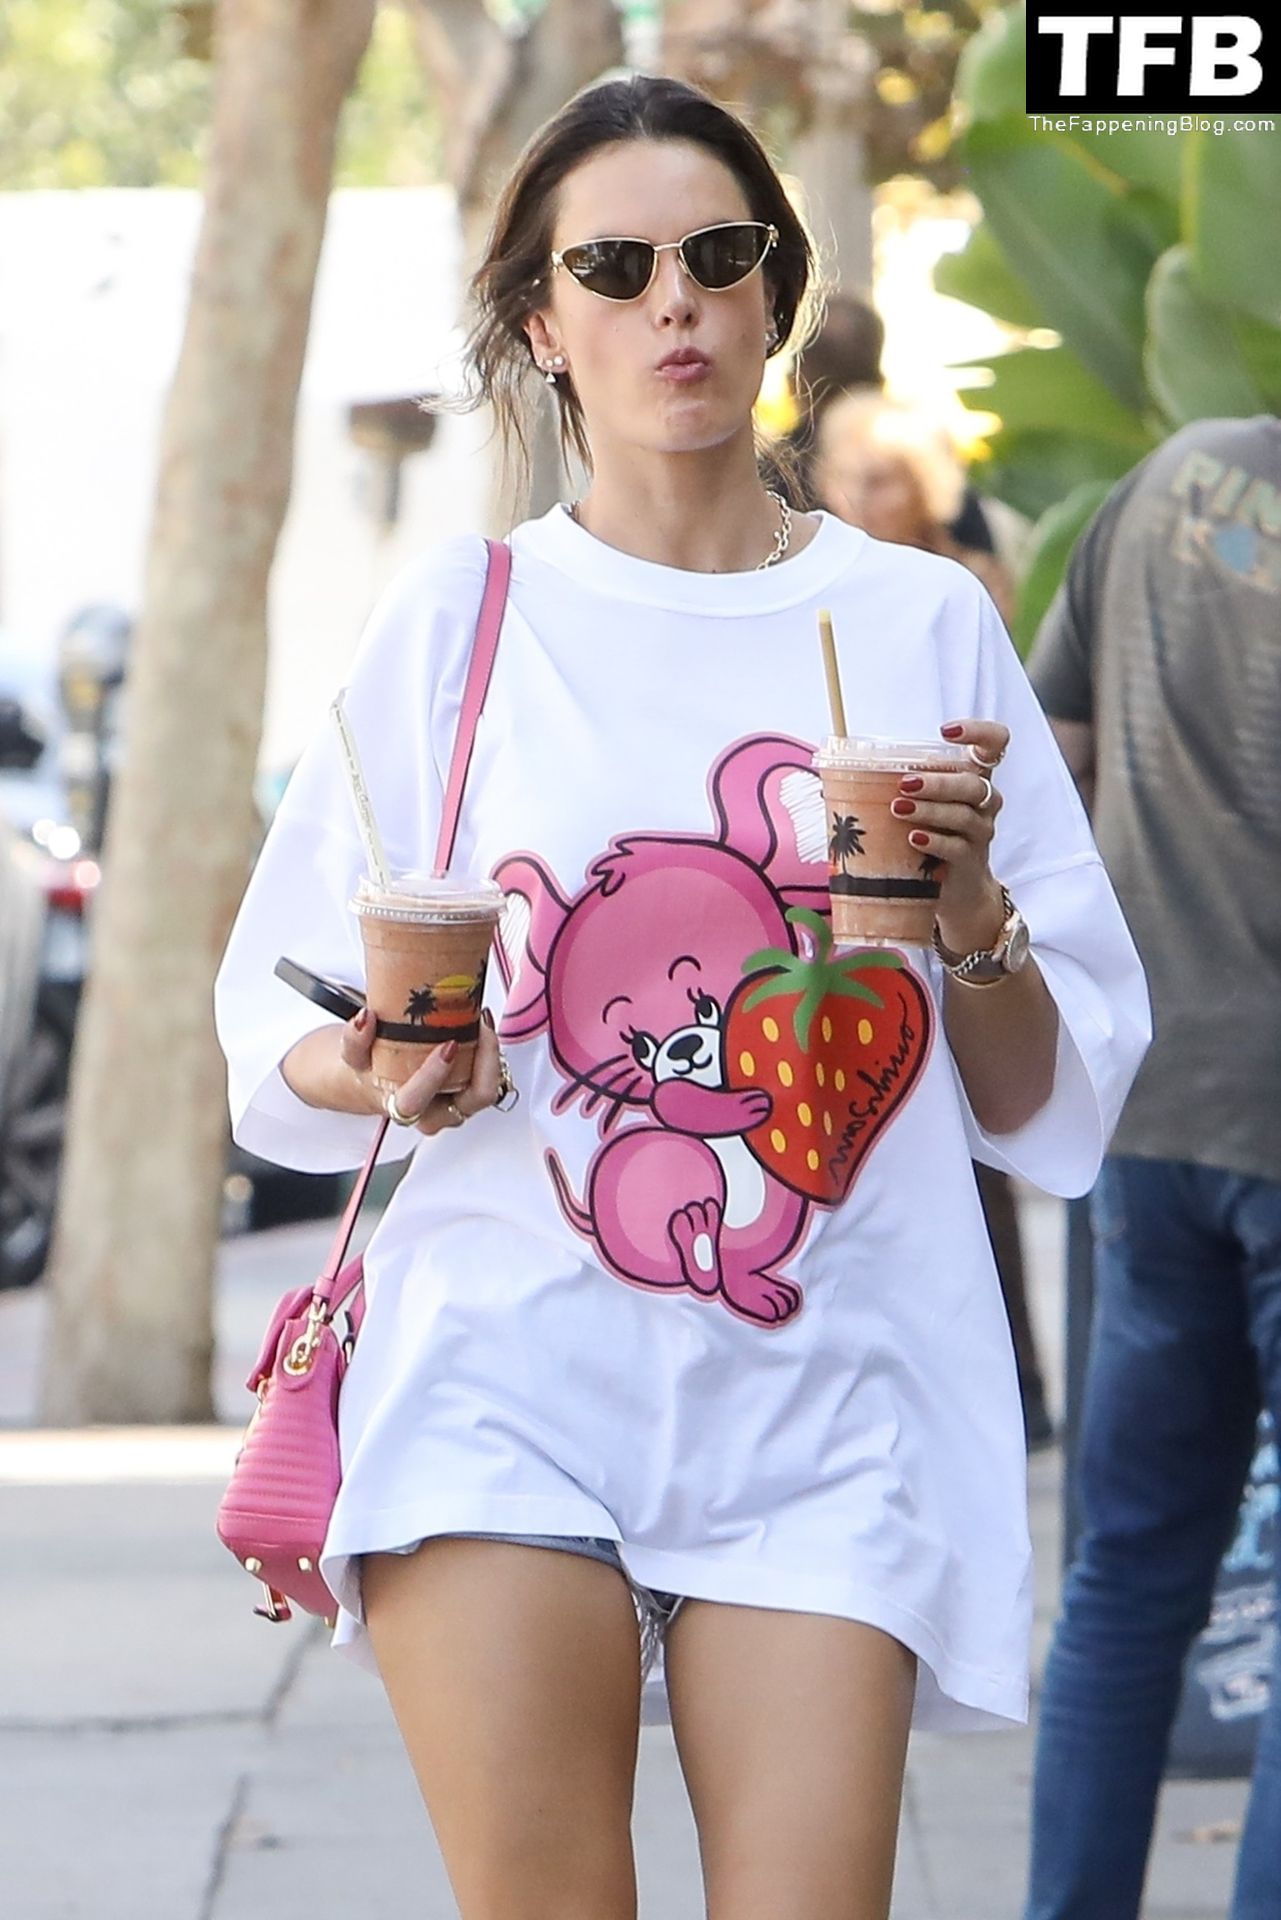 Alessandra Ambrosio Turns the Streets of Brentwood Into a Catwalk (99 Photos)